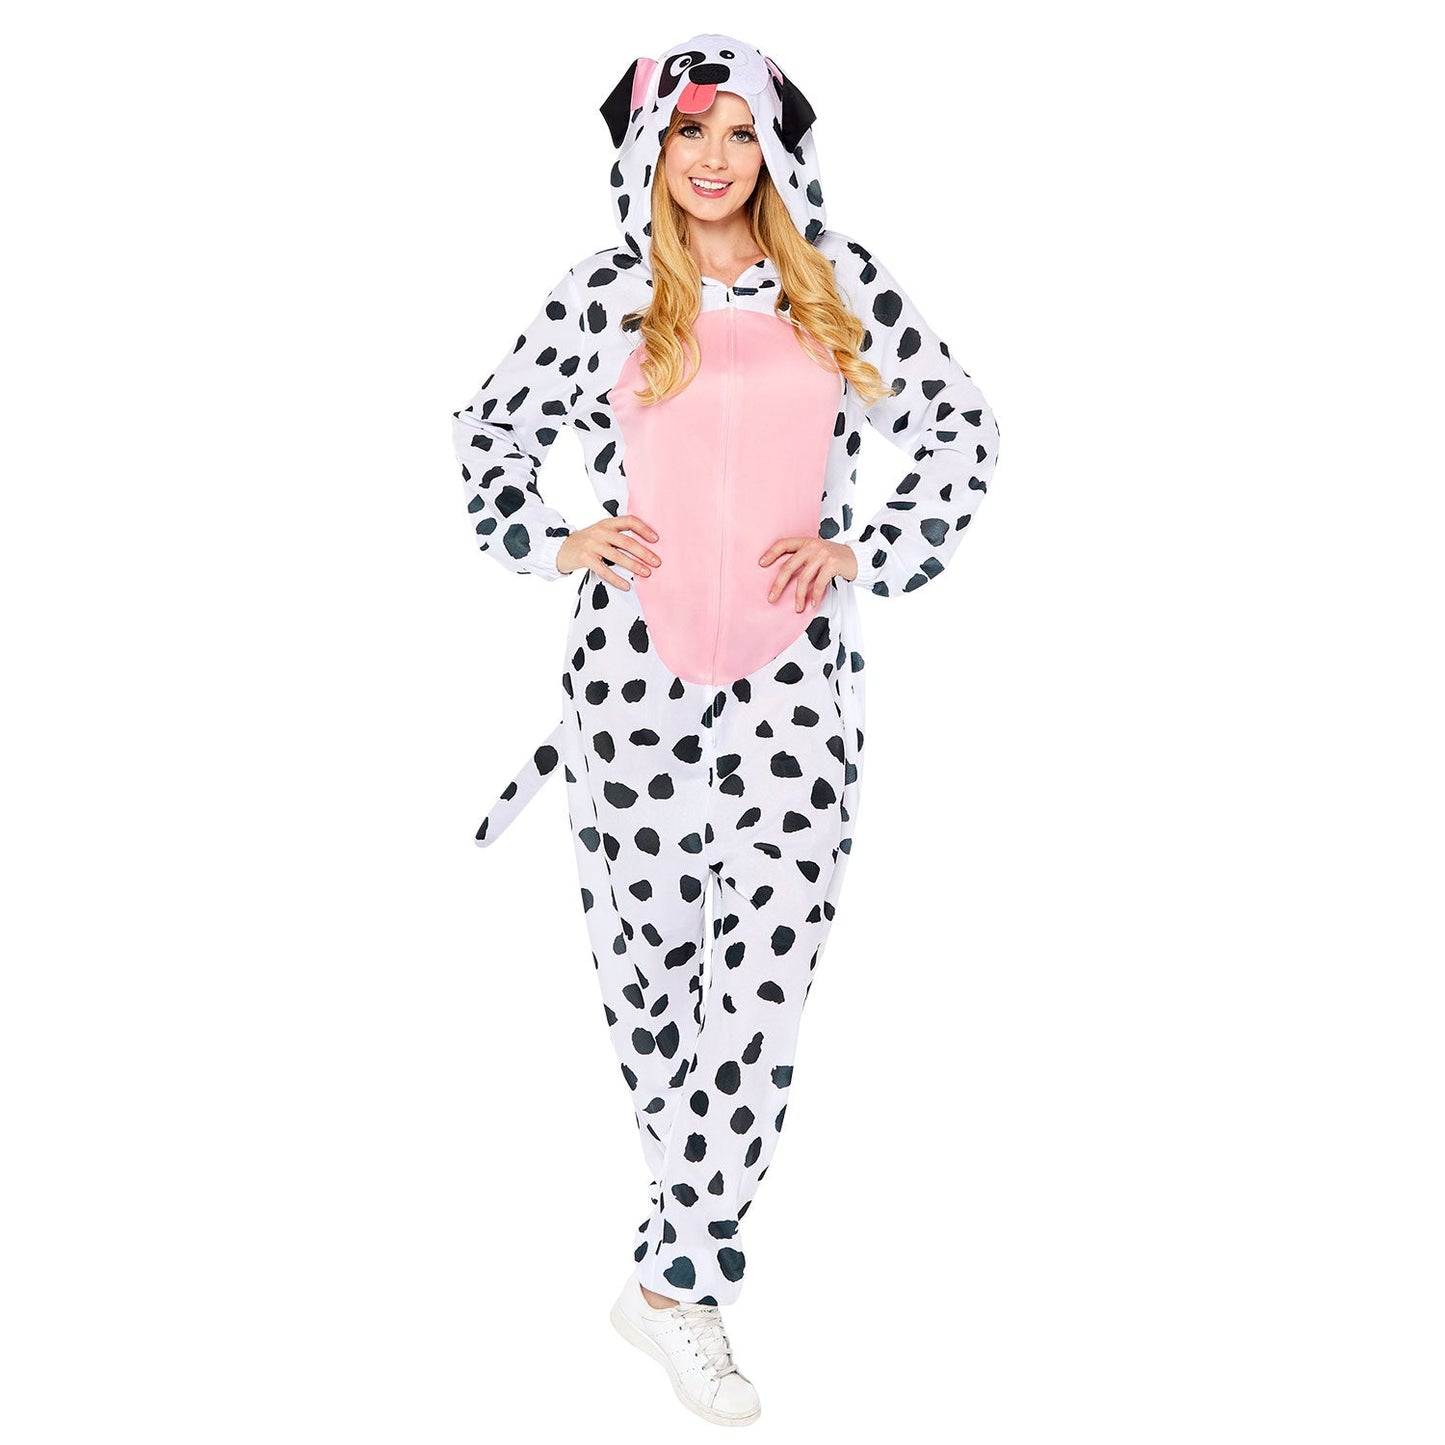 Adult Dog Onesie Costume includes jumpsuit with hood